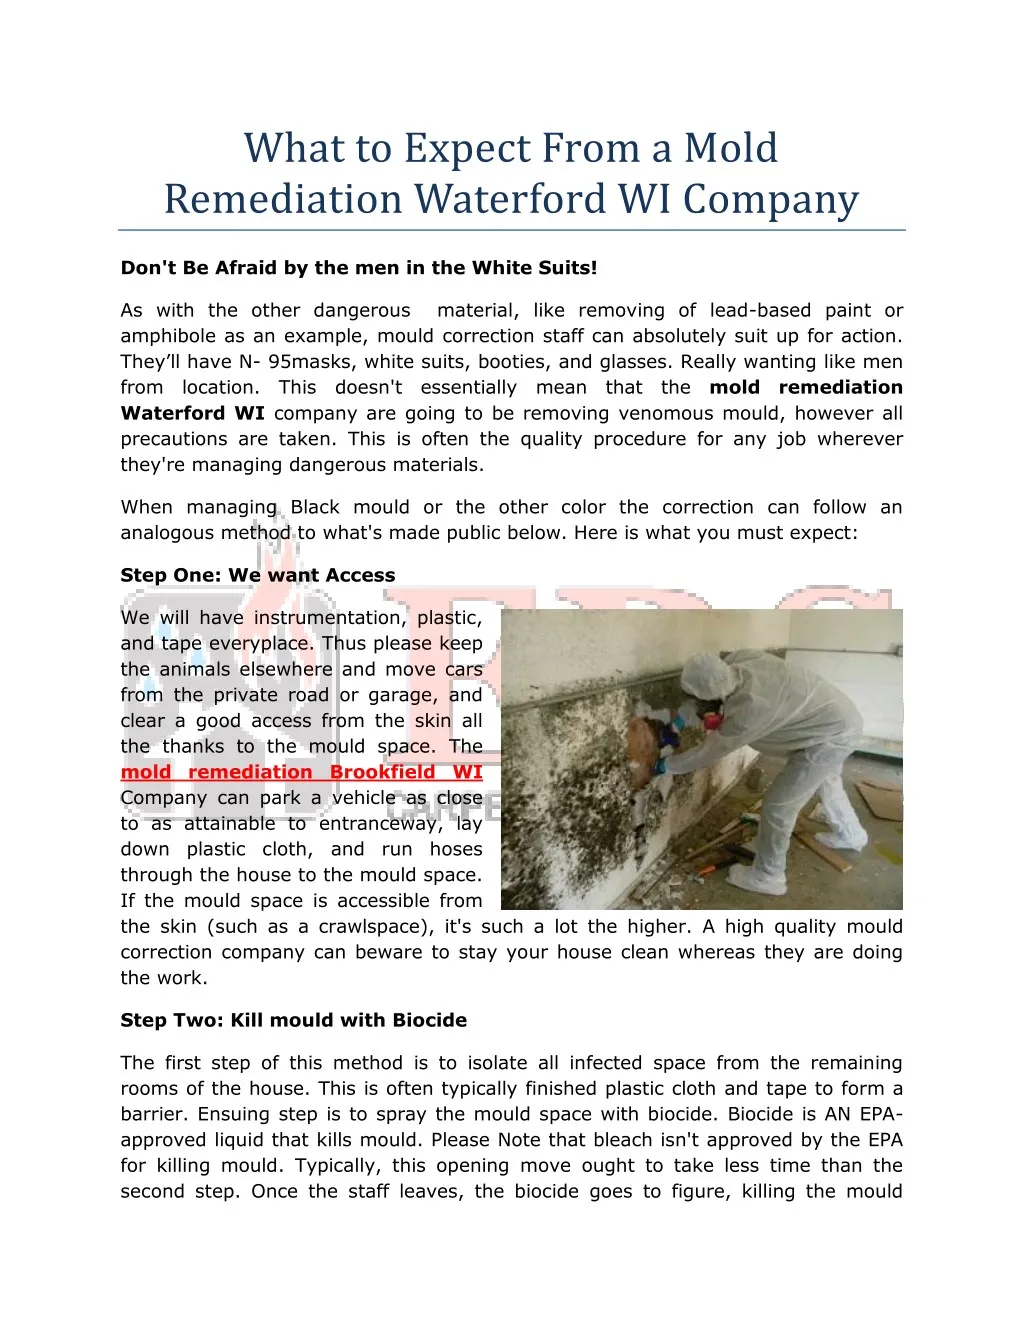 what to expect from a mold remediation waterford